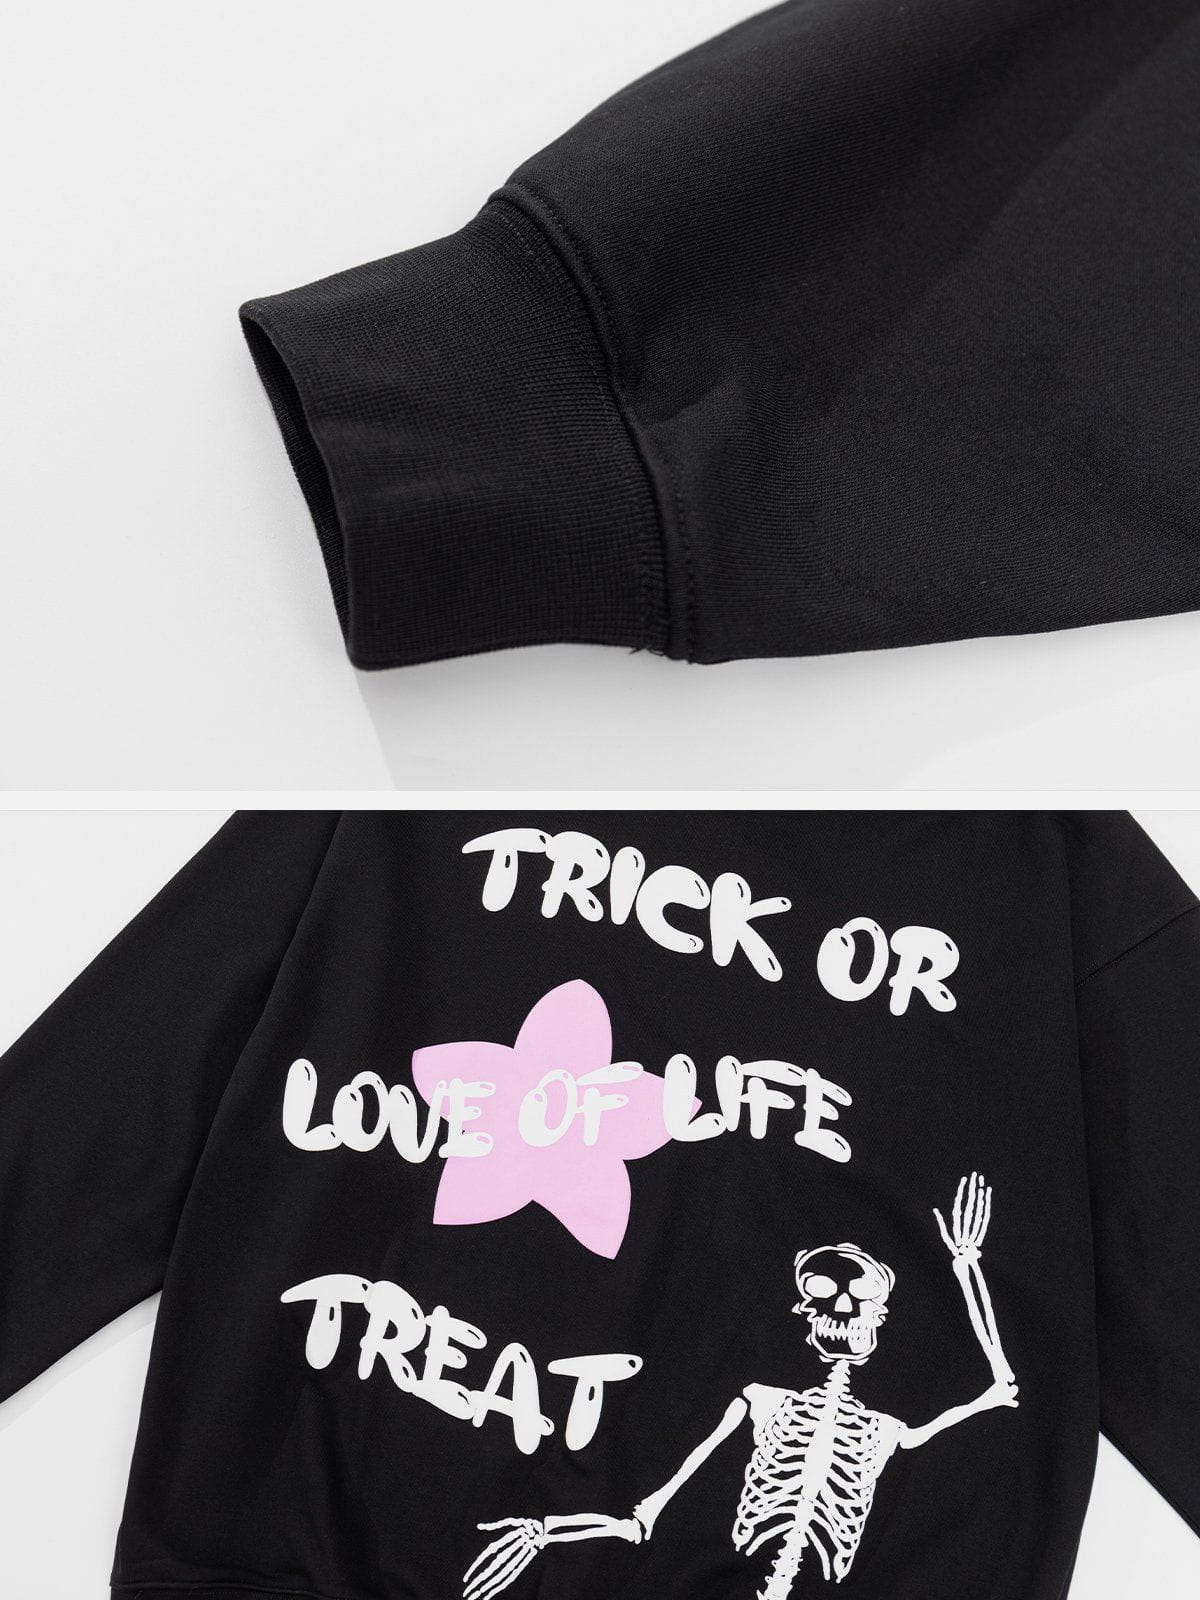 Faire Echo "Trick Yourself Or Treat Yourself" Hoodie